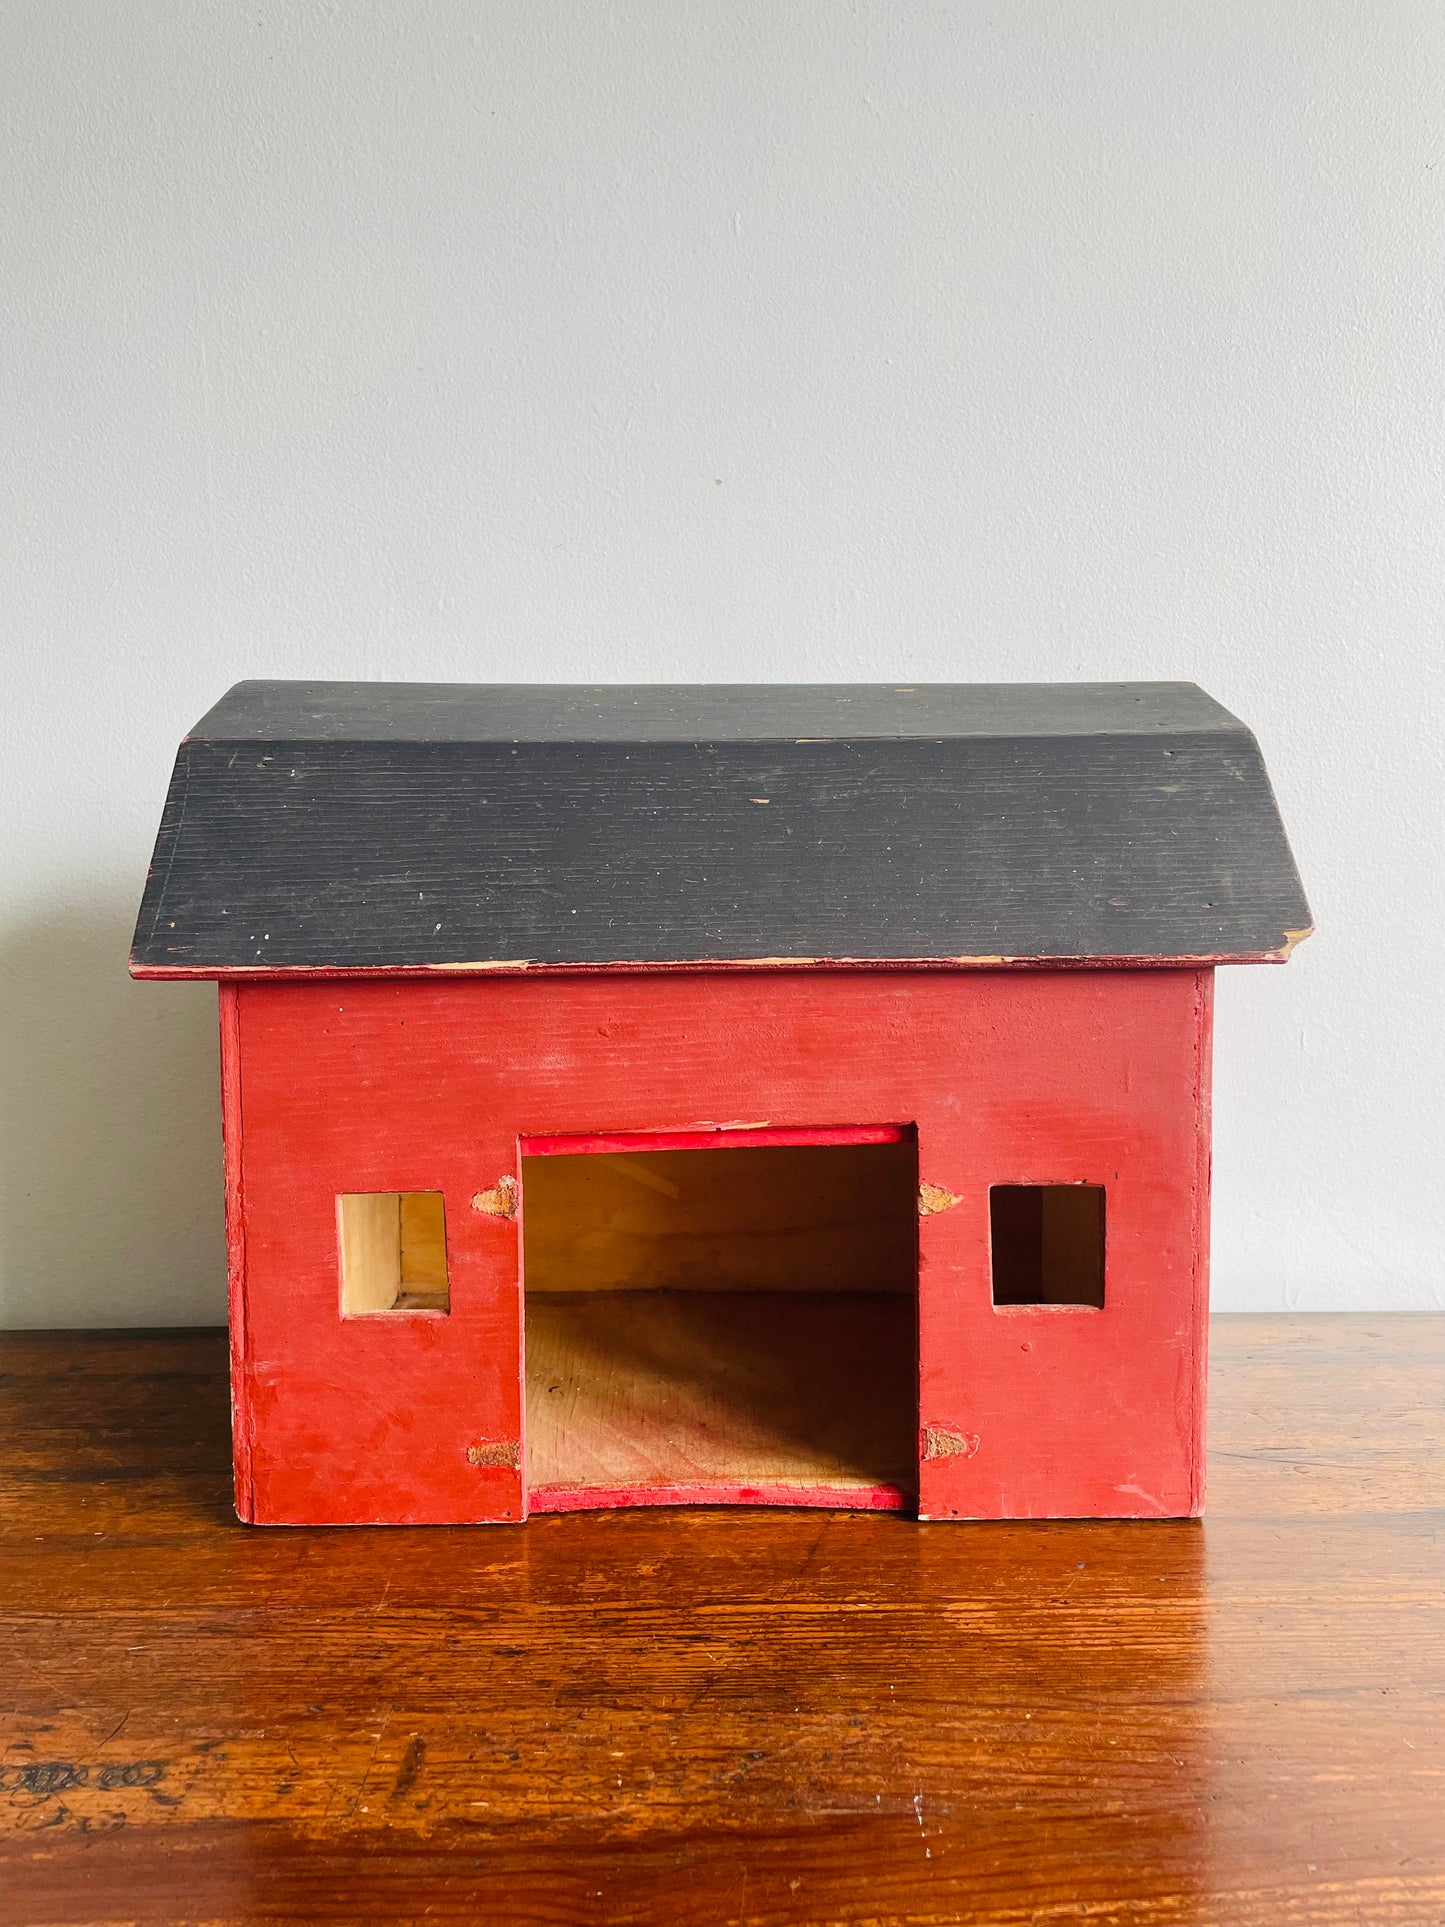 Handmade Red Wooden Barn - Child's Toy or Decor